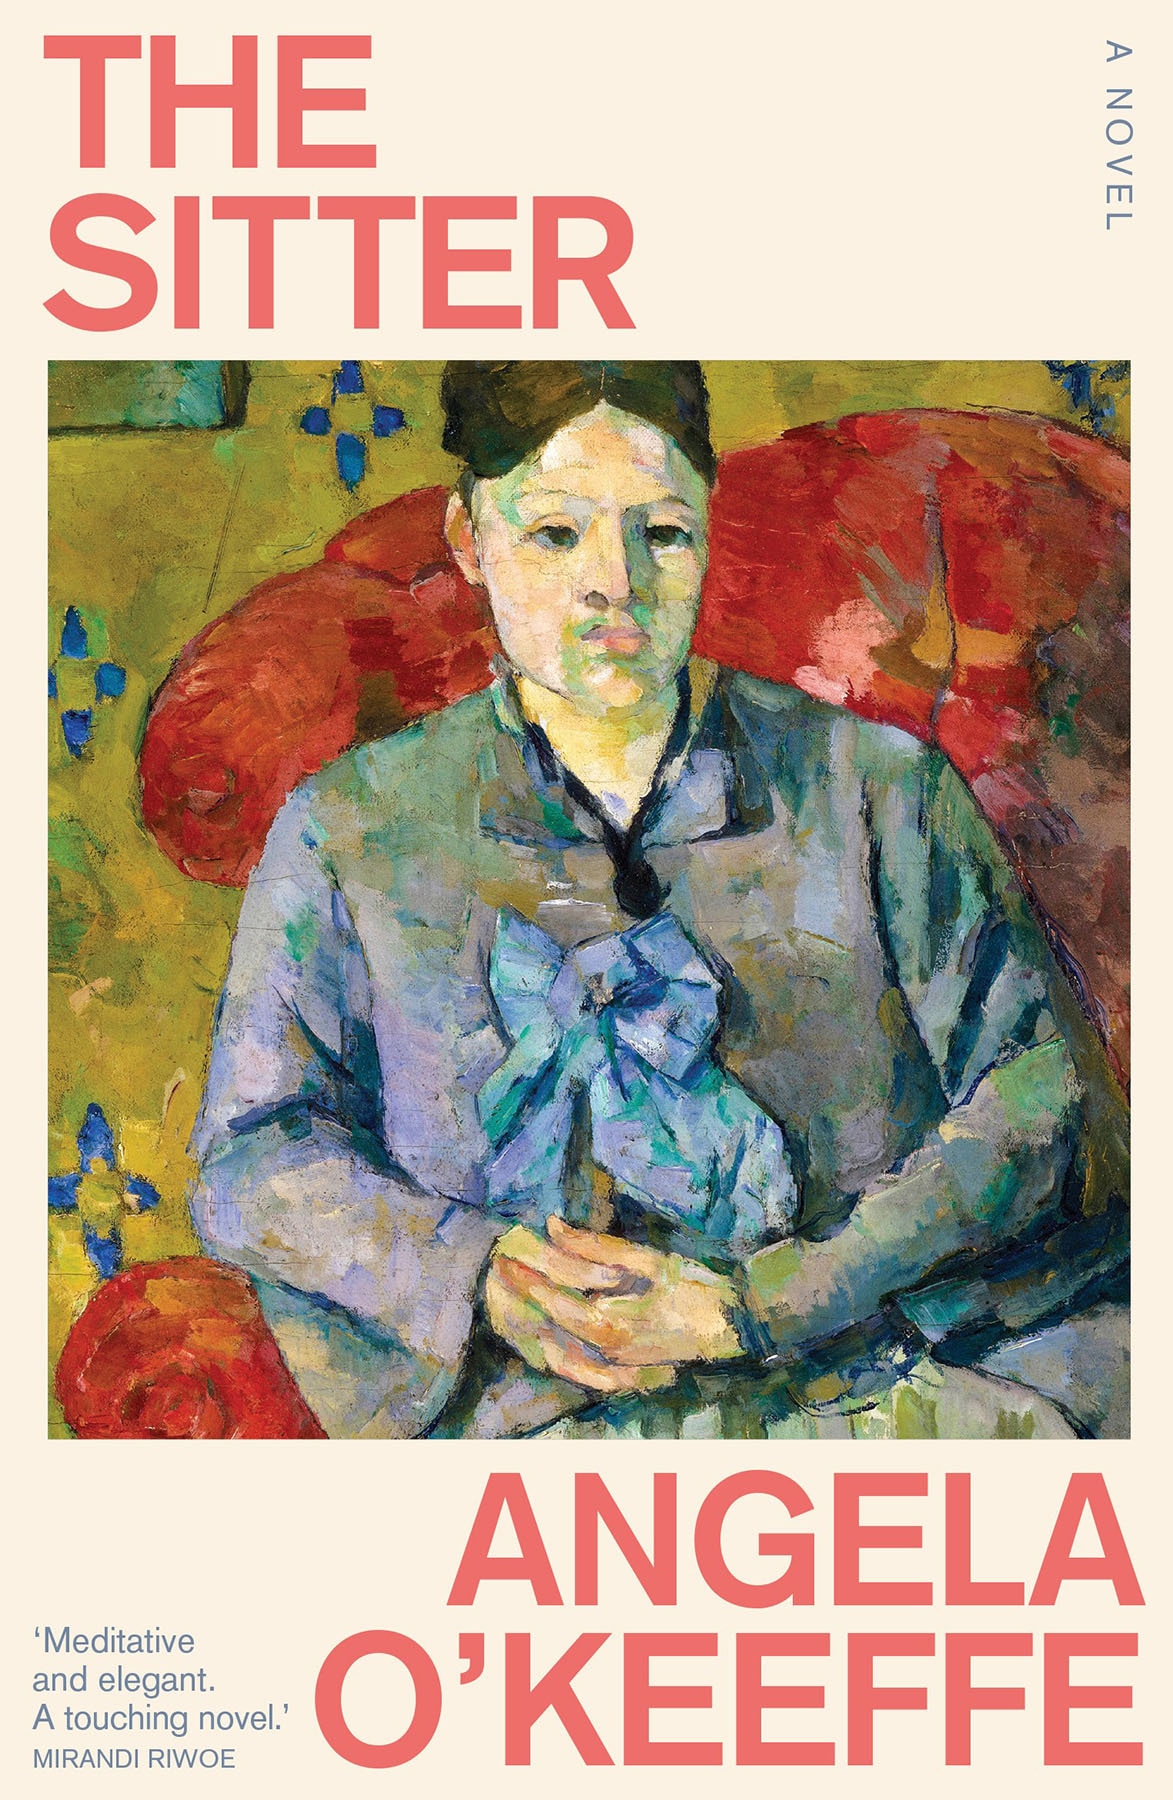 A book cover showing a painted portrait of a woman sitting in a chair